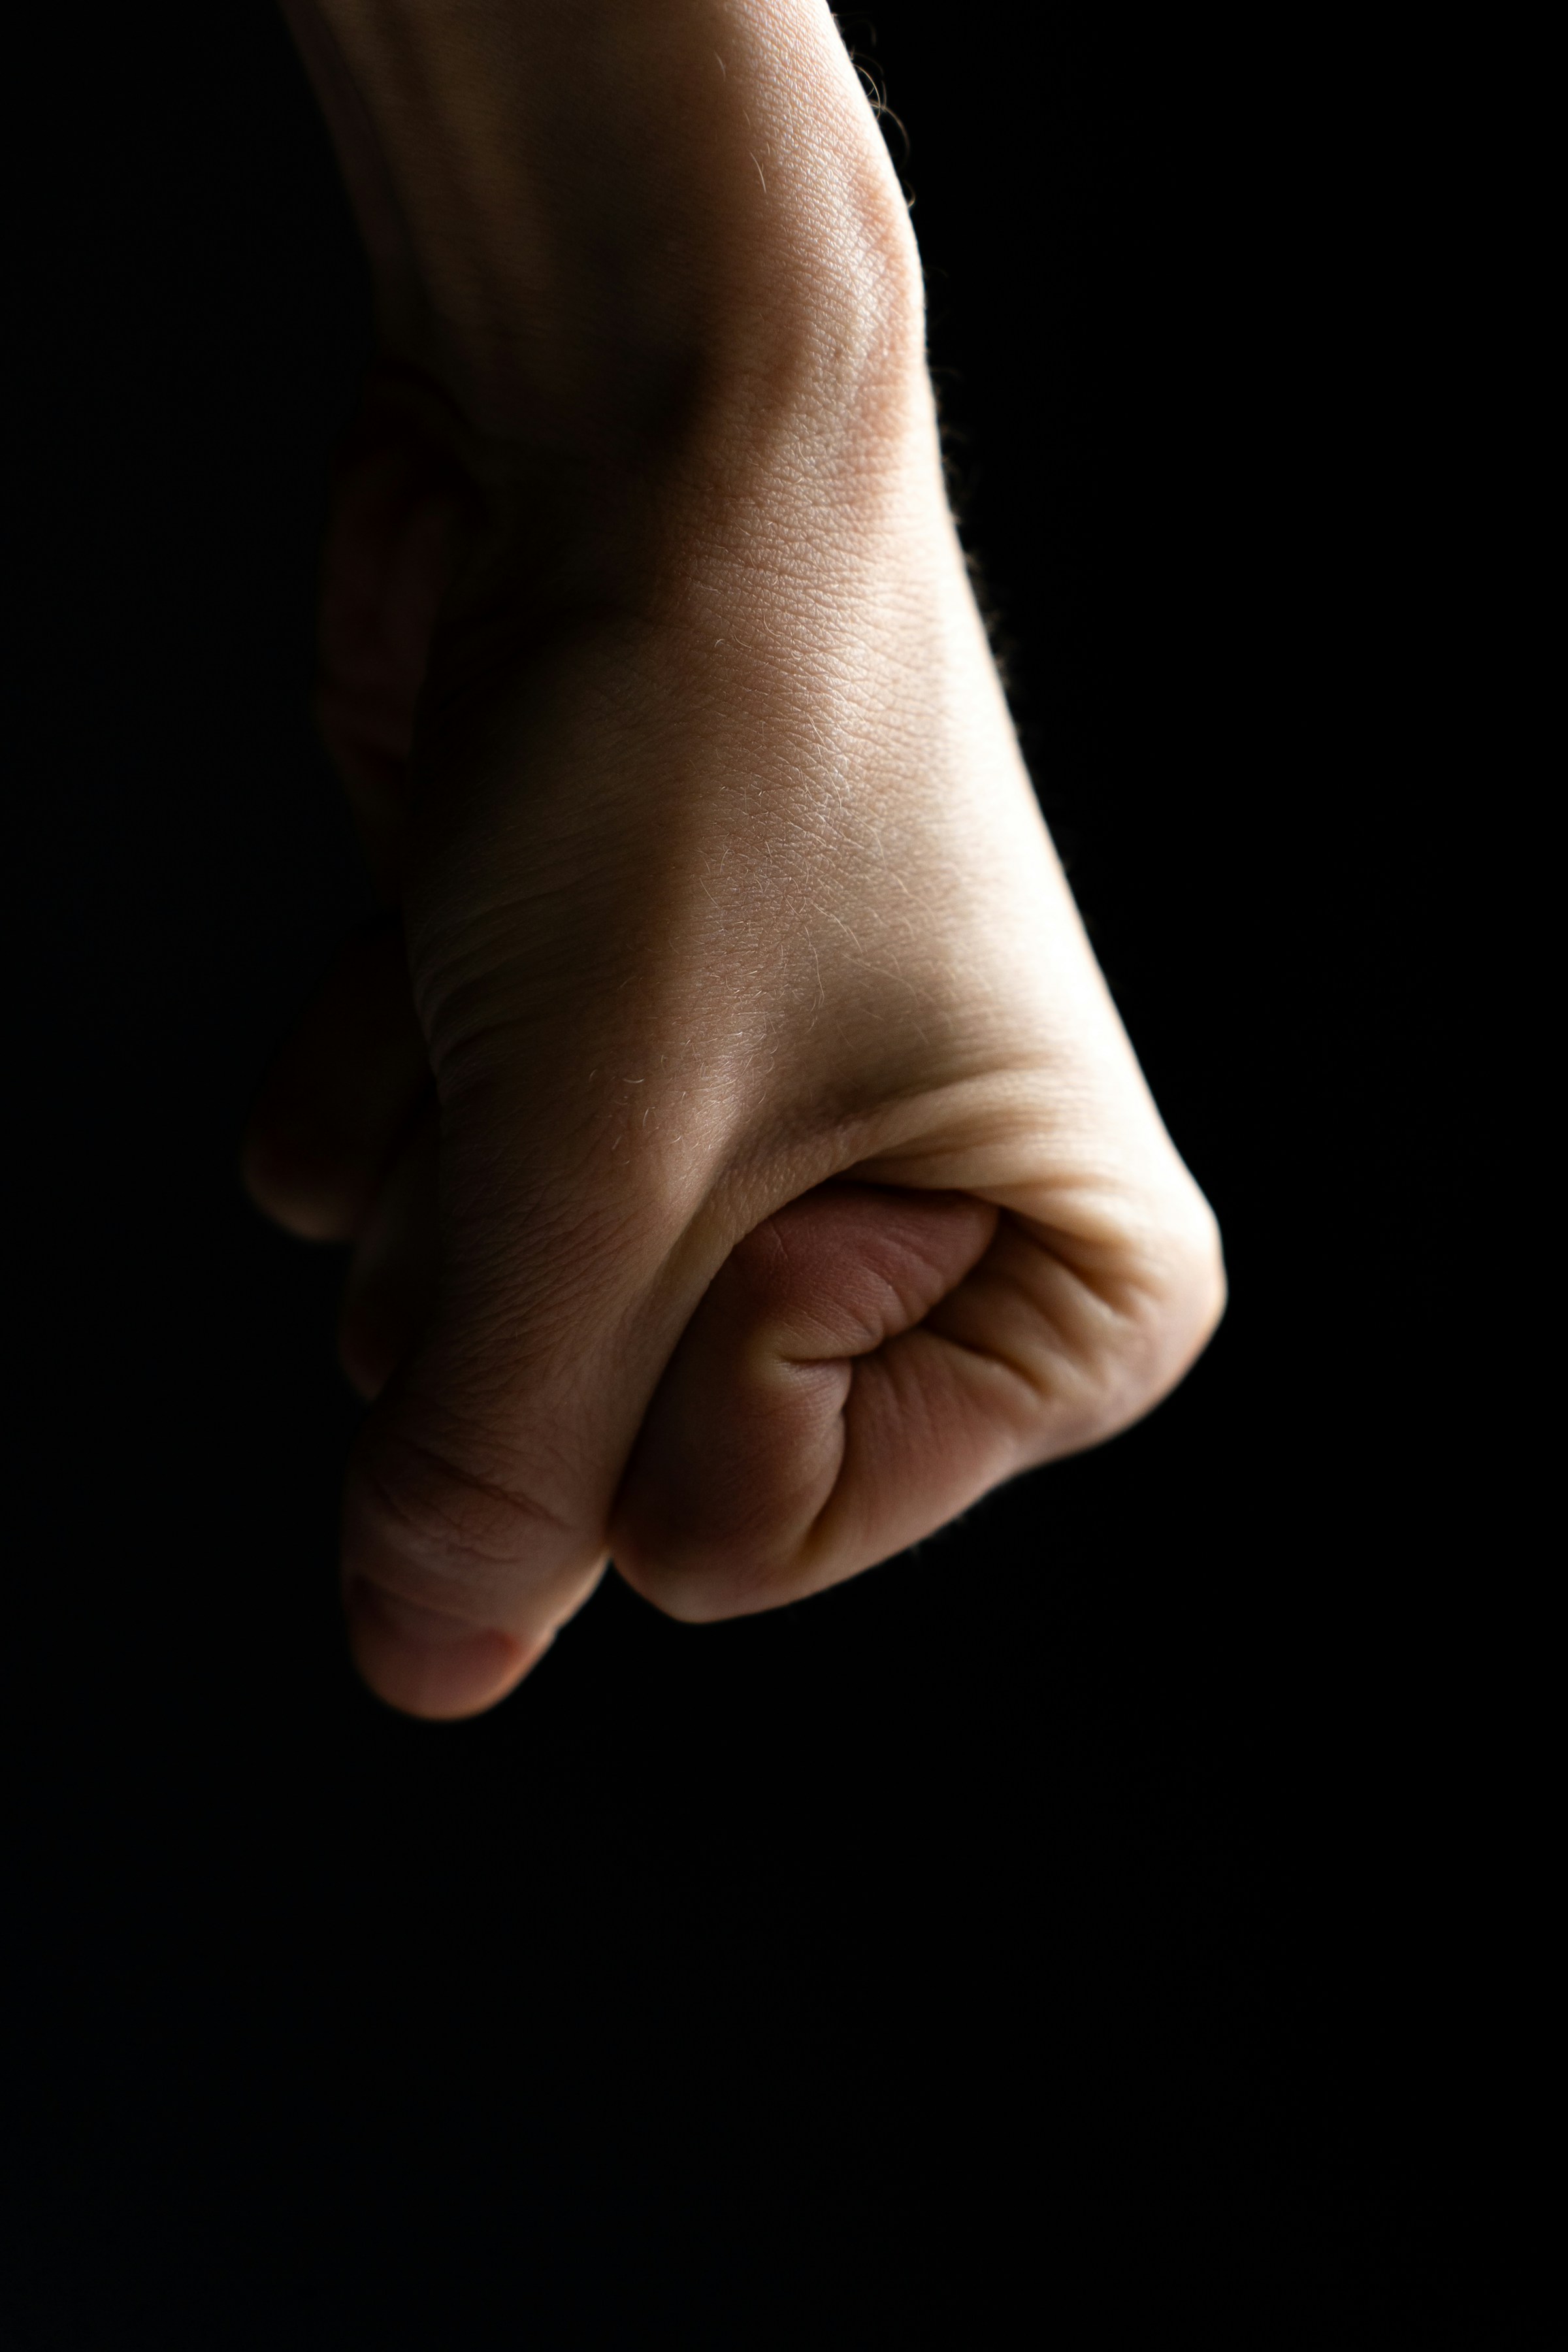 Close-up of a clenched fist | Source: Unsplash